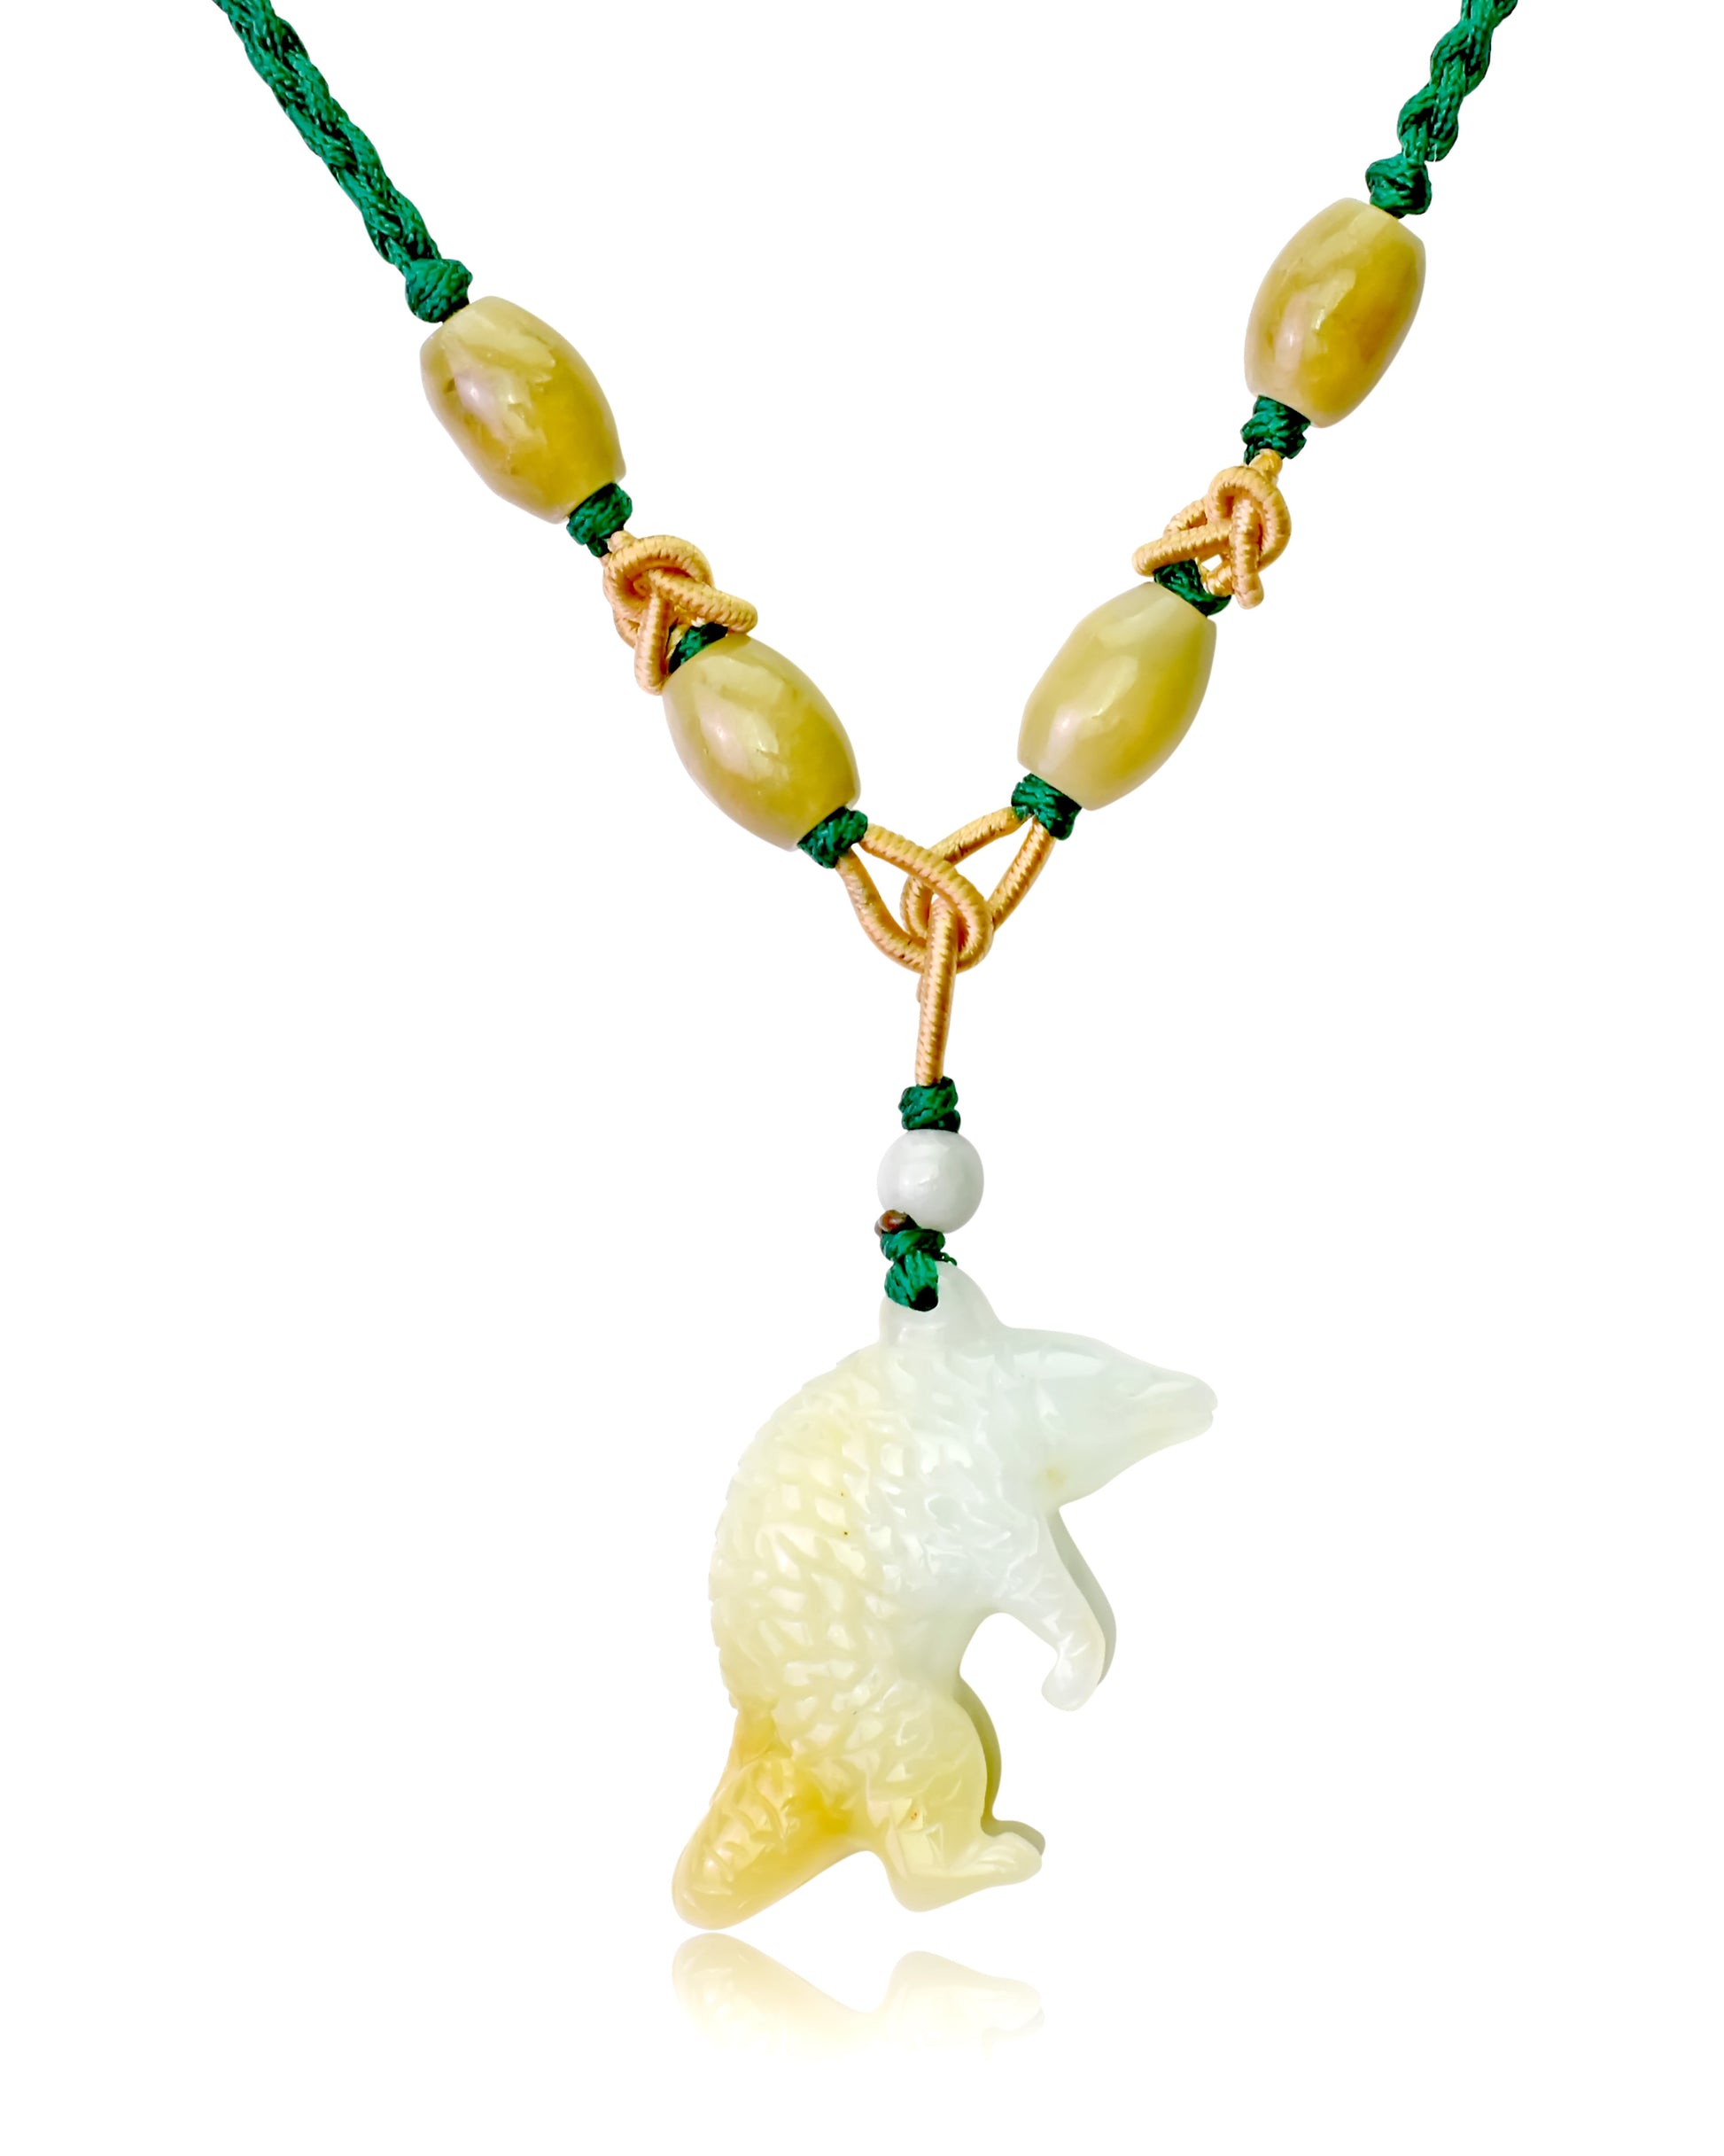 Bring Nature to Life with Anteater Animal Handmade Jade Nec